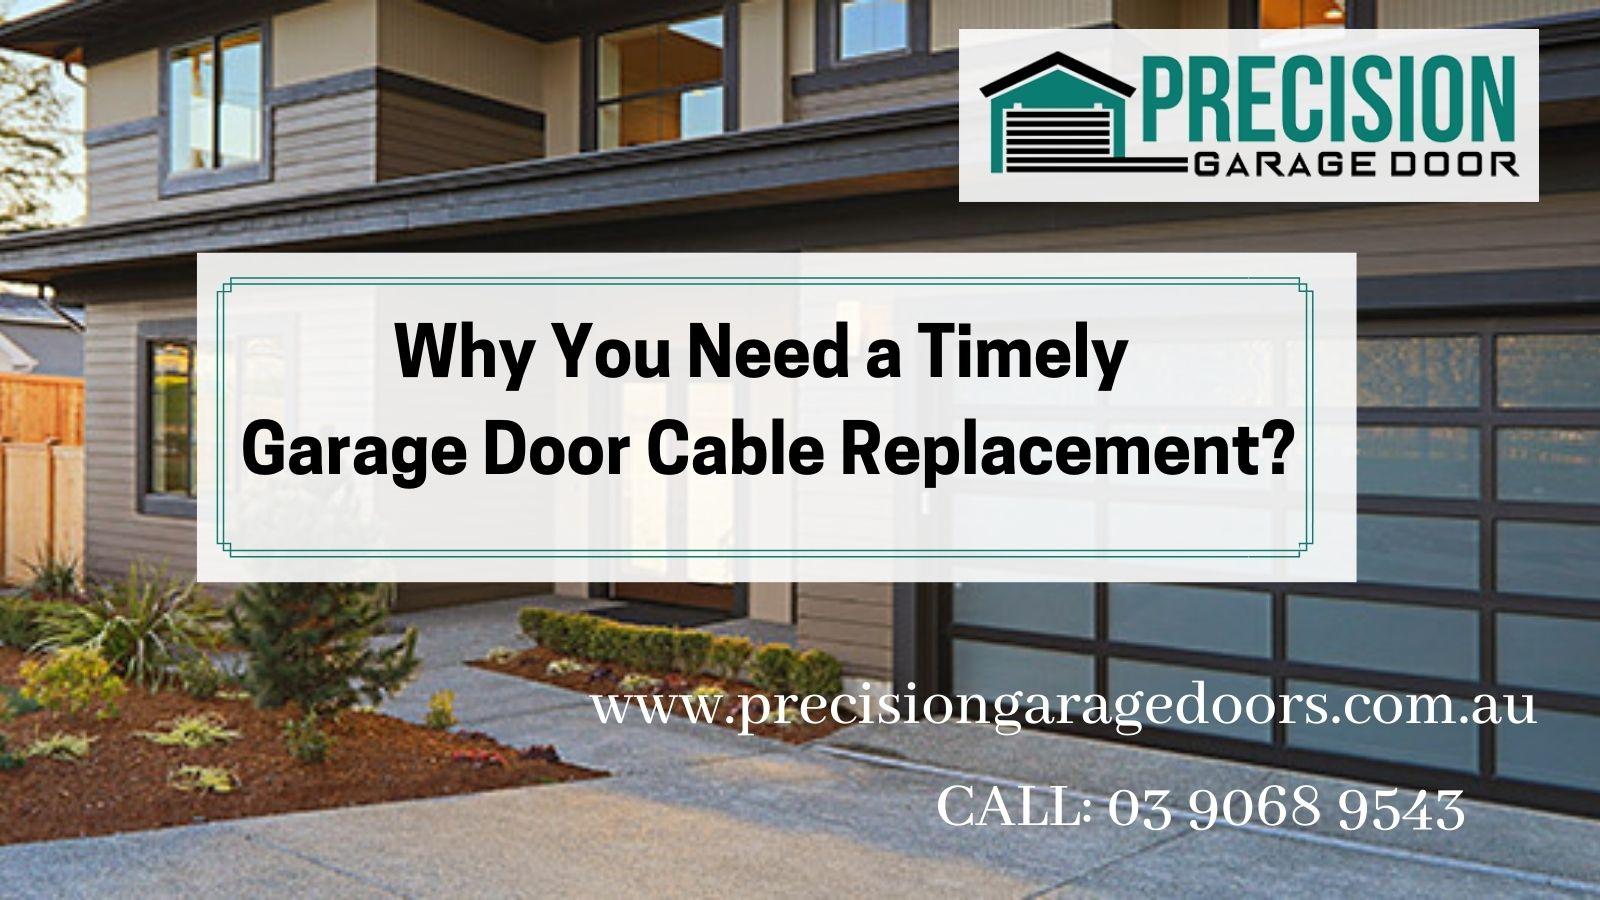 Why You Need a Timely Garage Door Cable Replacement